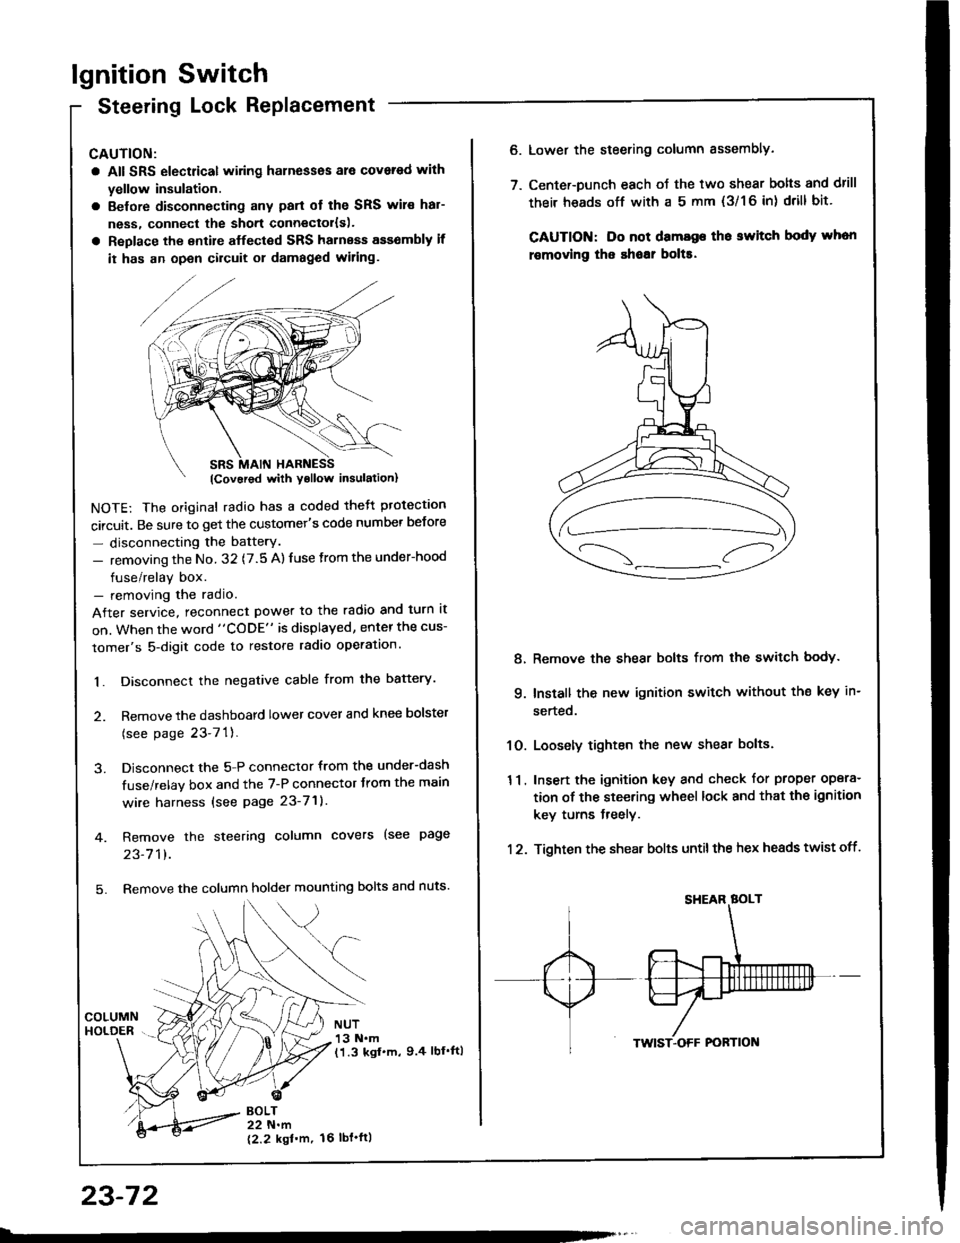 HONDA INTEGRA 1994 4.G Service Manual lgnition Switch
Steering Lock Replacement
CAUTION:
a All SRS electrical wiring harnesses ale covsred with
yellow insulation.
a Belore disconnecting any parl ot the SRS wir€ hal-
ness, connecl the sh